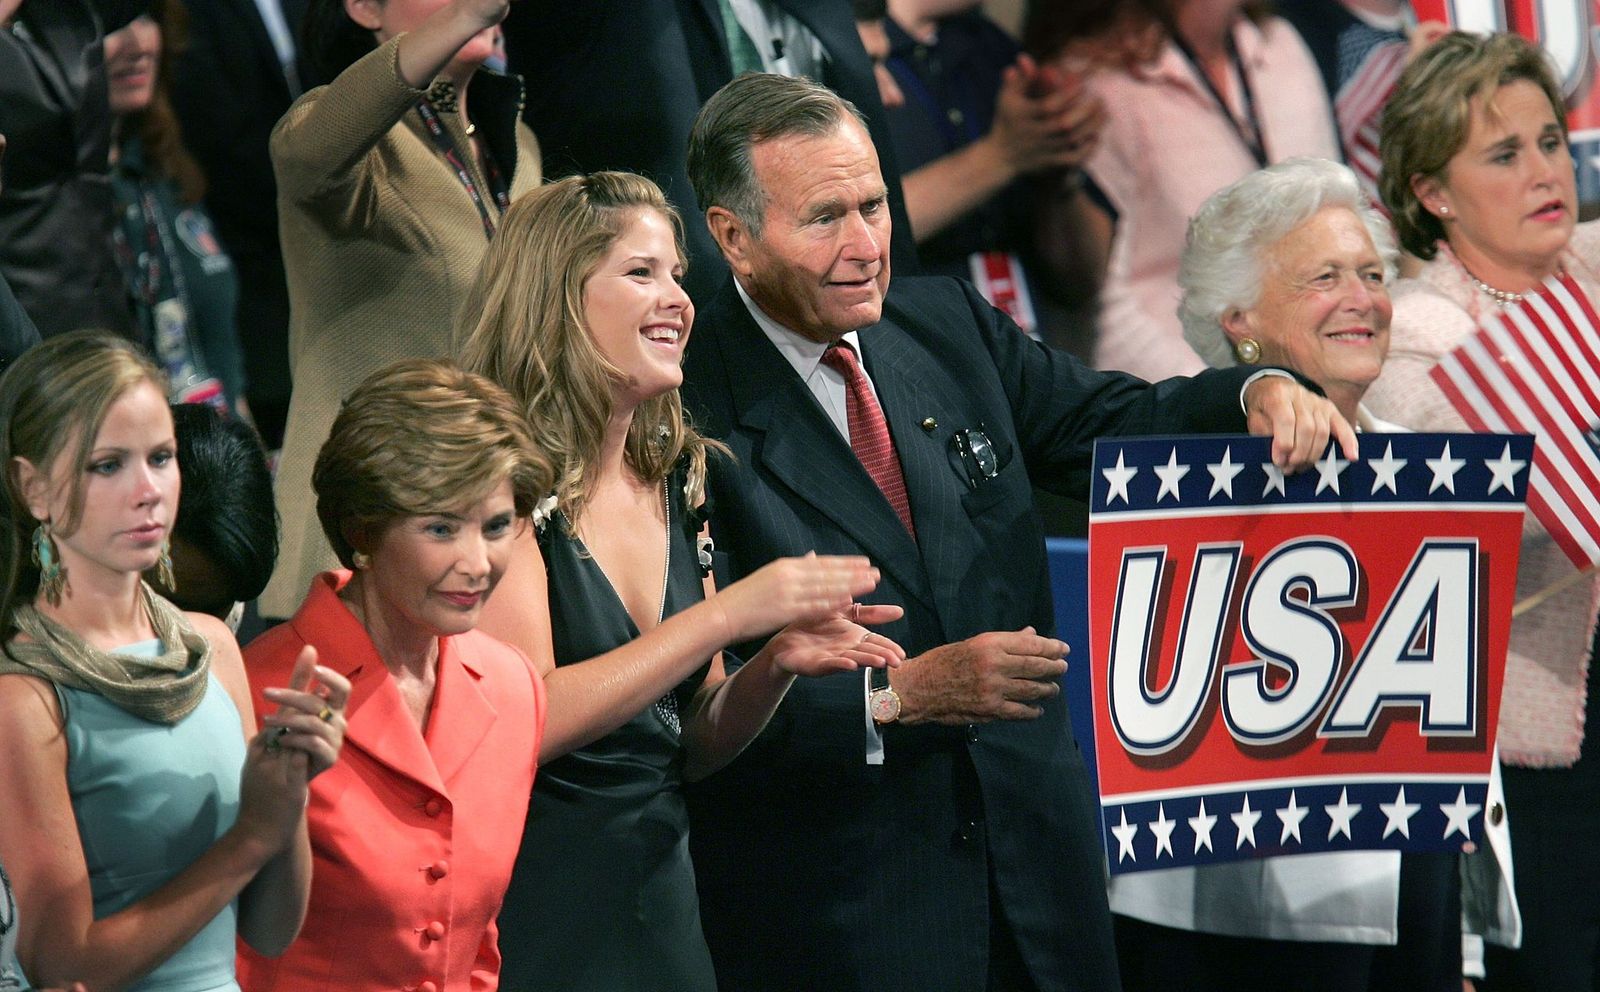 U.S. President George W. Bush's and his family on the final night of the Republican National Convention September 2, 2004 | Photo: Getty Images